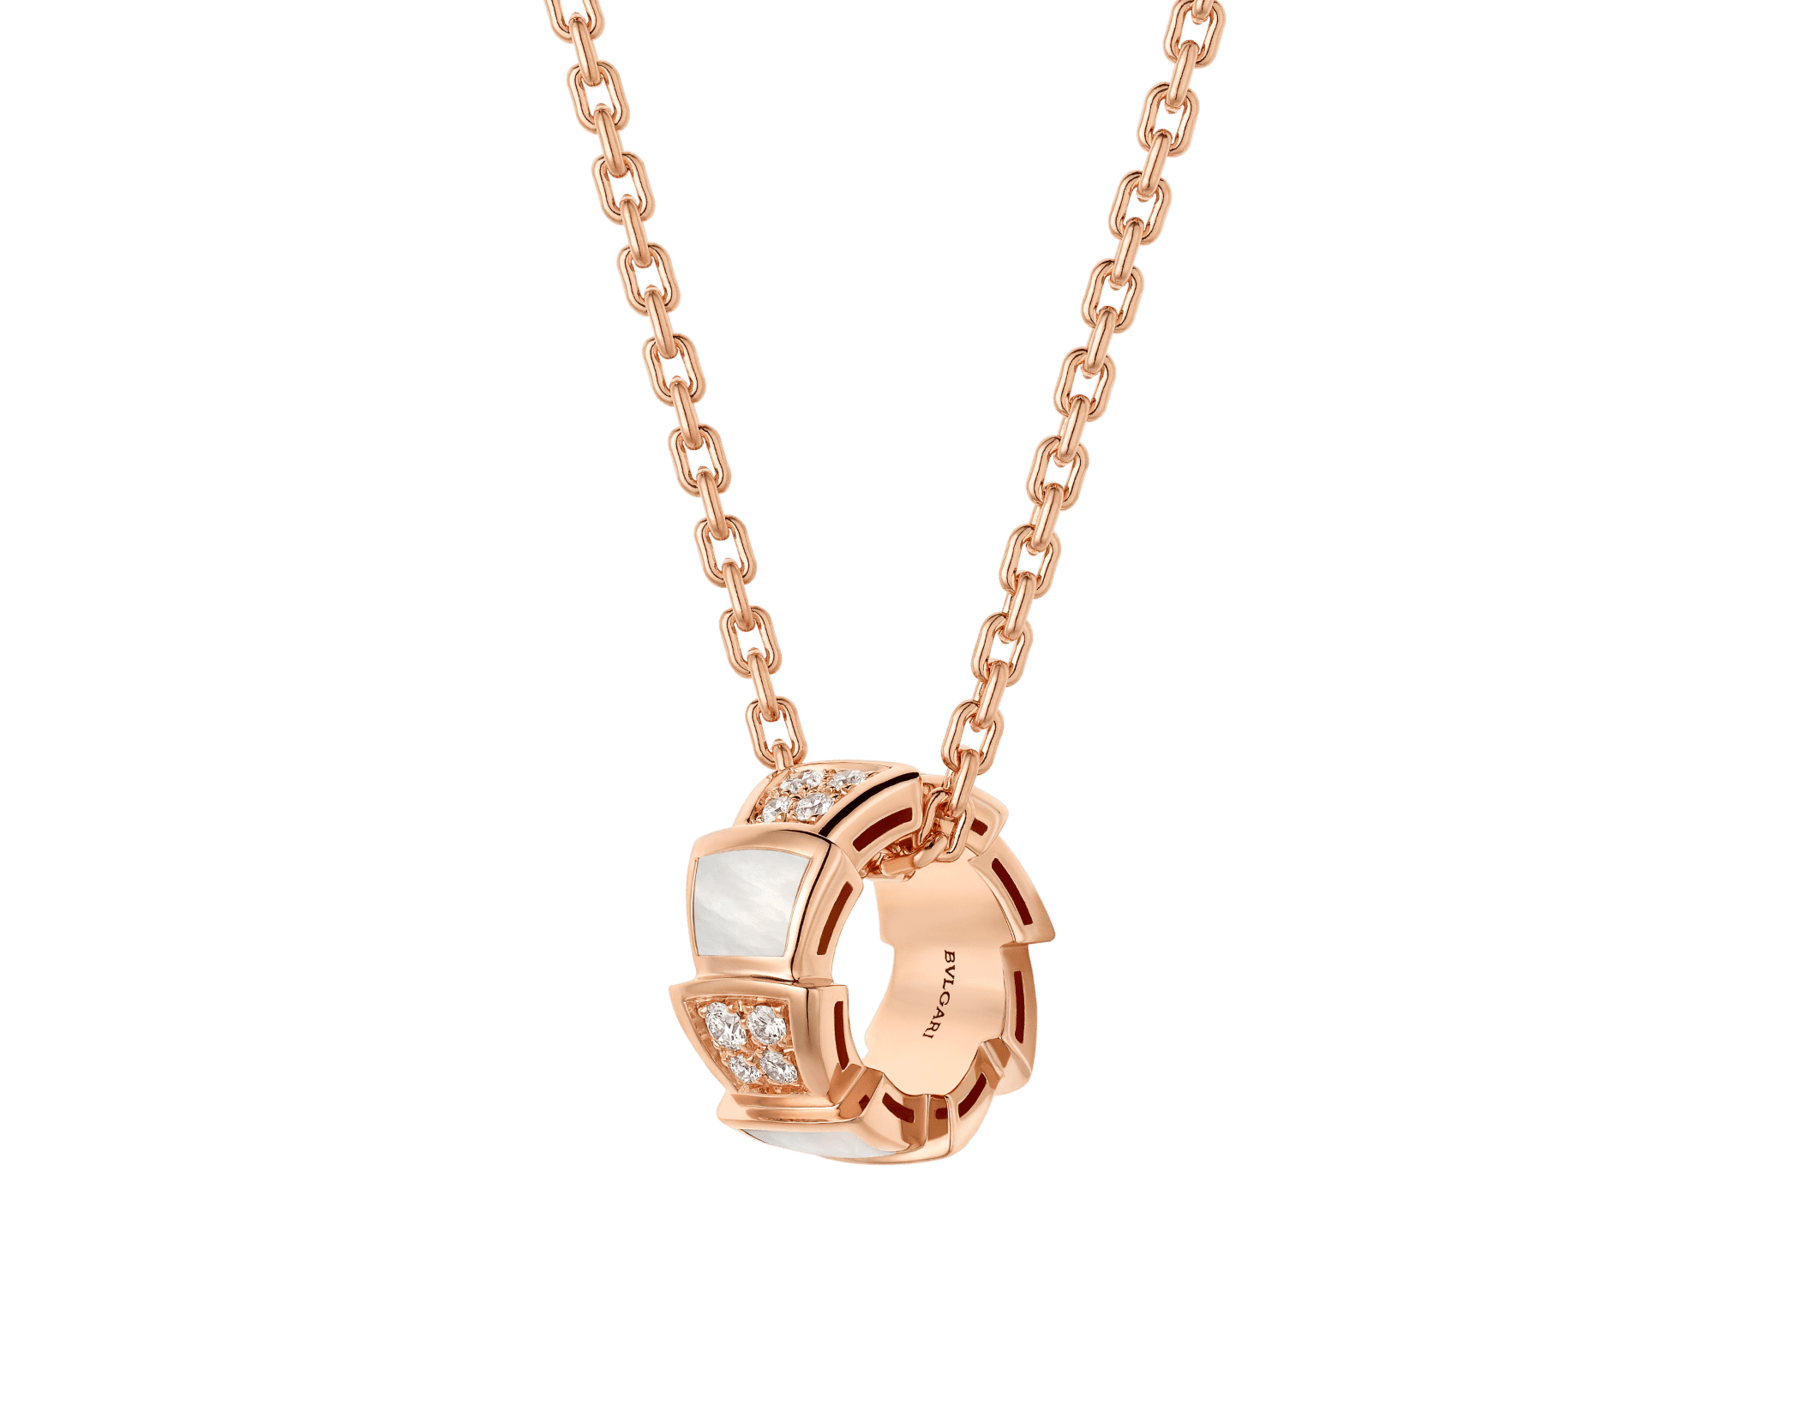 Serpenti Viper 18 kt rose gold necklace set with mother-of-pearl elements and pavé diamonds on the pendant. 357095 image 1